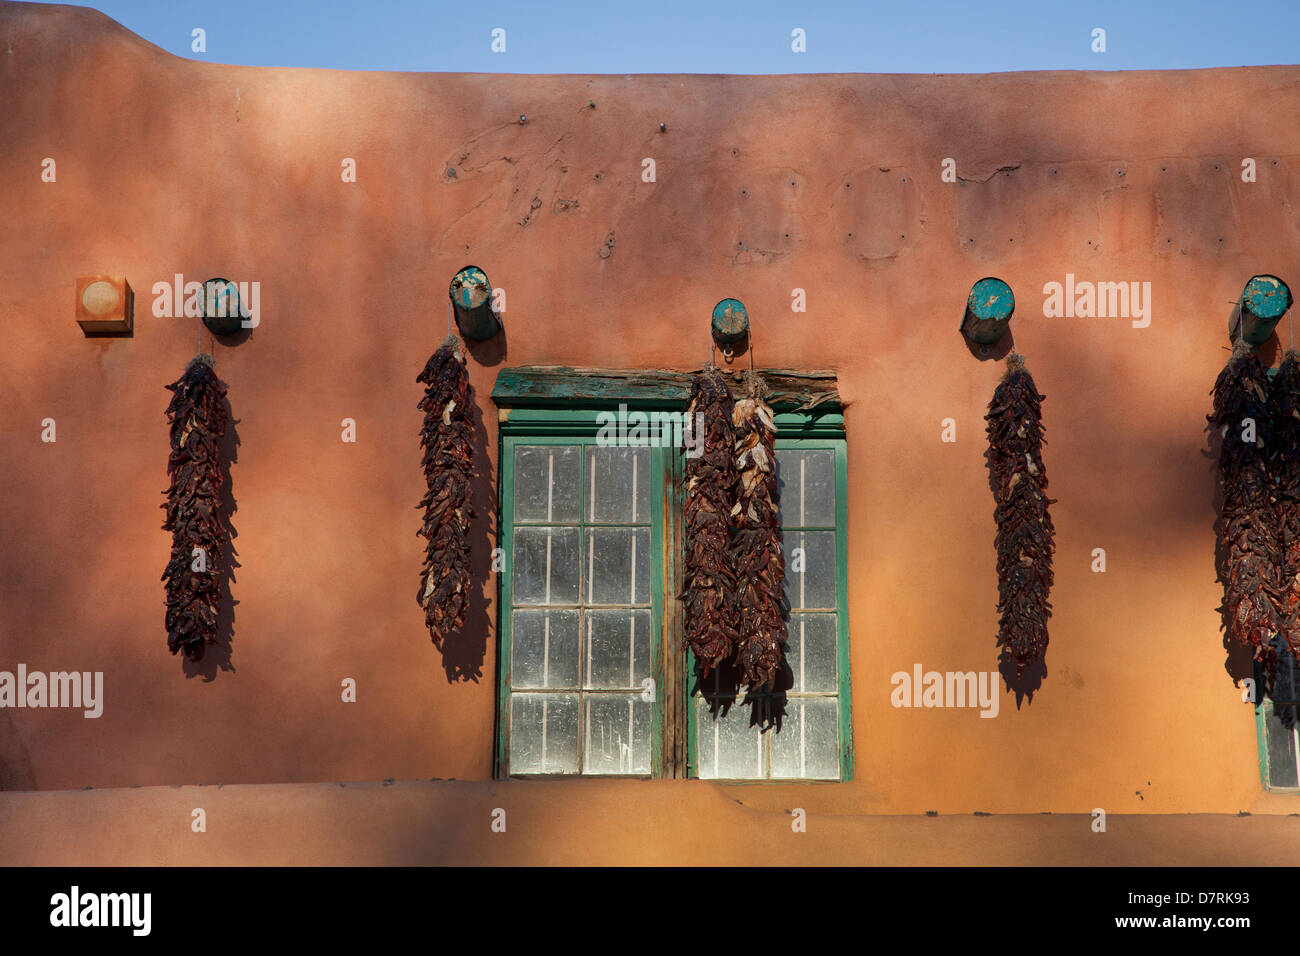 Chile ristras adorn a storefront along West Plaza Street which borders the Plaza in Taos, New Mexico. Stock Photo